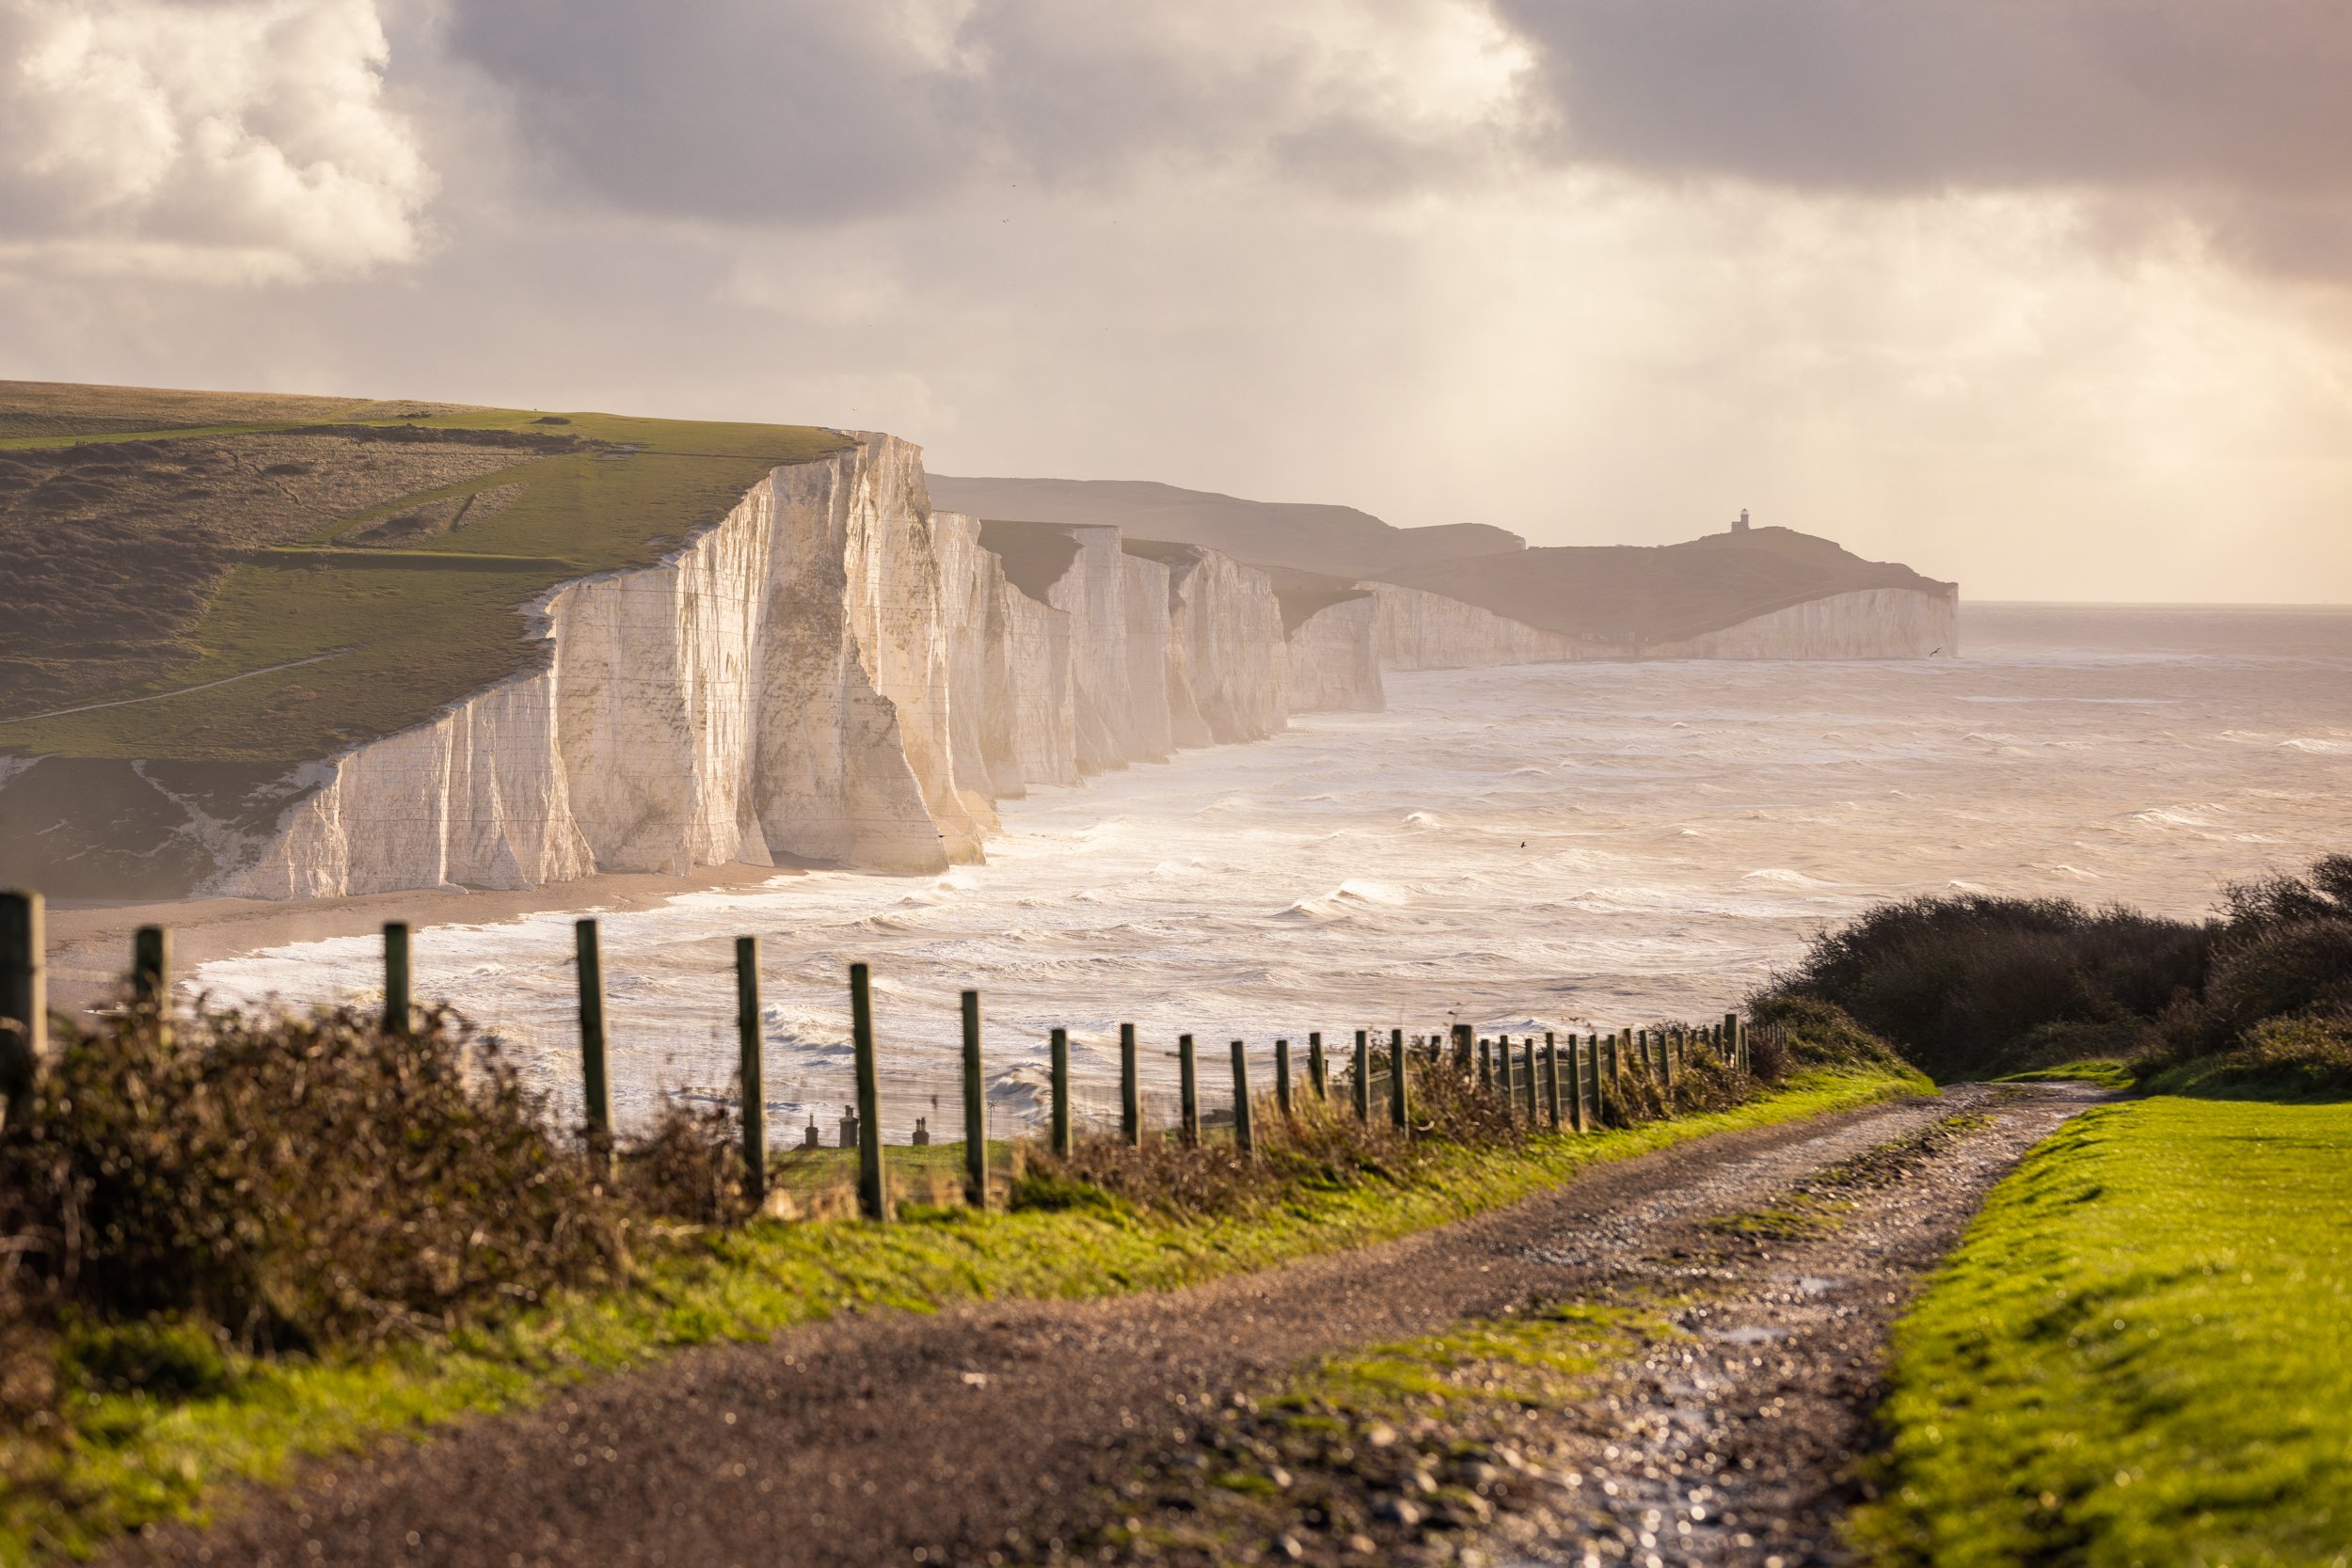 Photograph of the Seven Sisters Cliffs